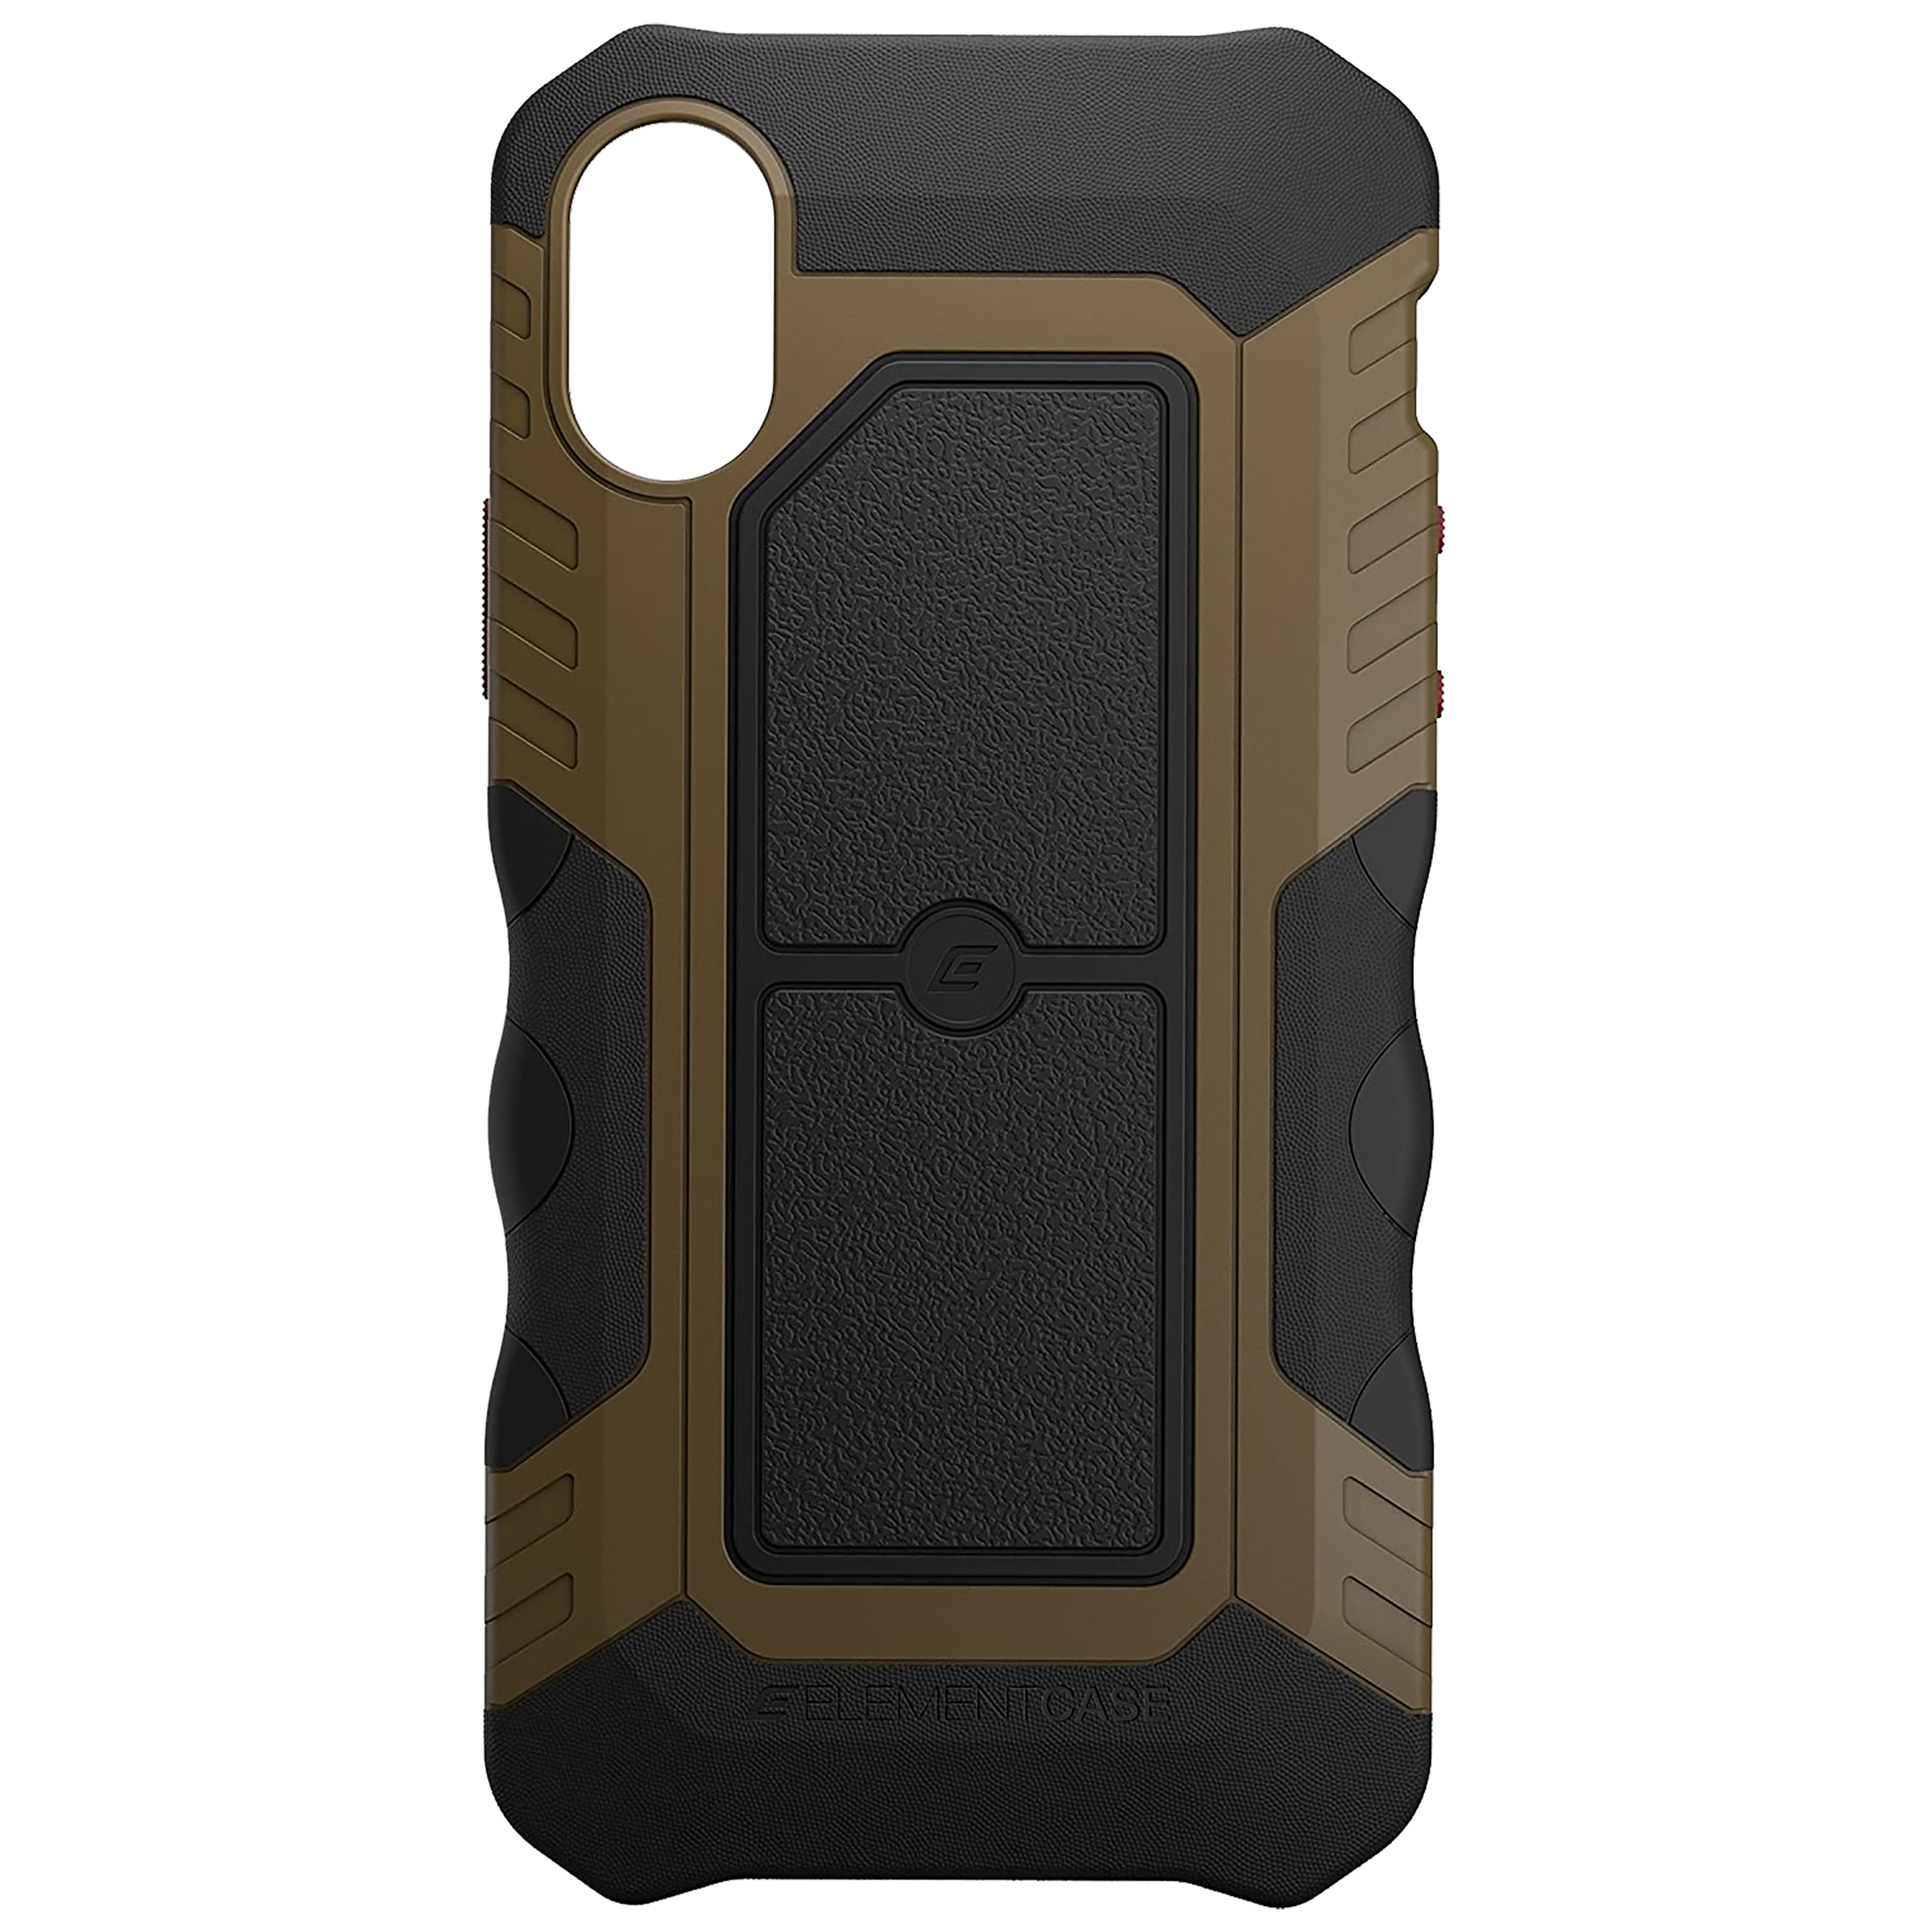 Element Case Recon Polycarbonate Back Case For iPhone X / XS (Reinforced Chassis, EMT-322-174EY-10, Coyote)_1